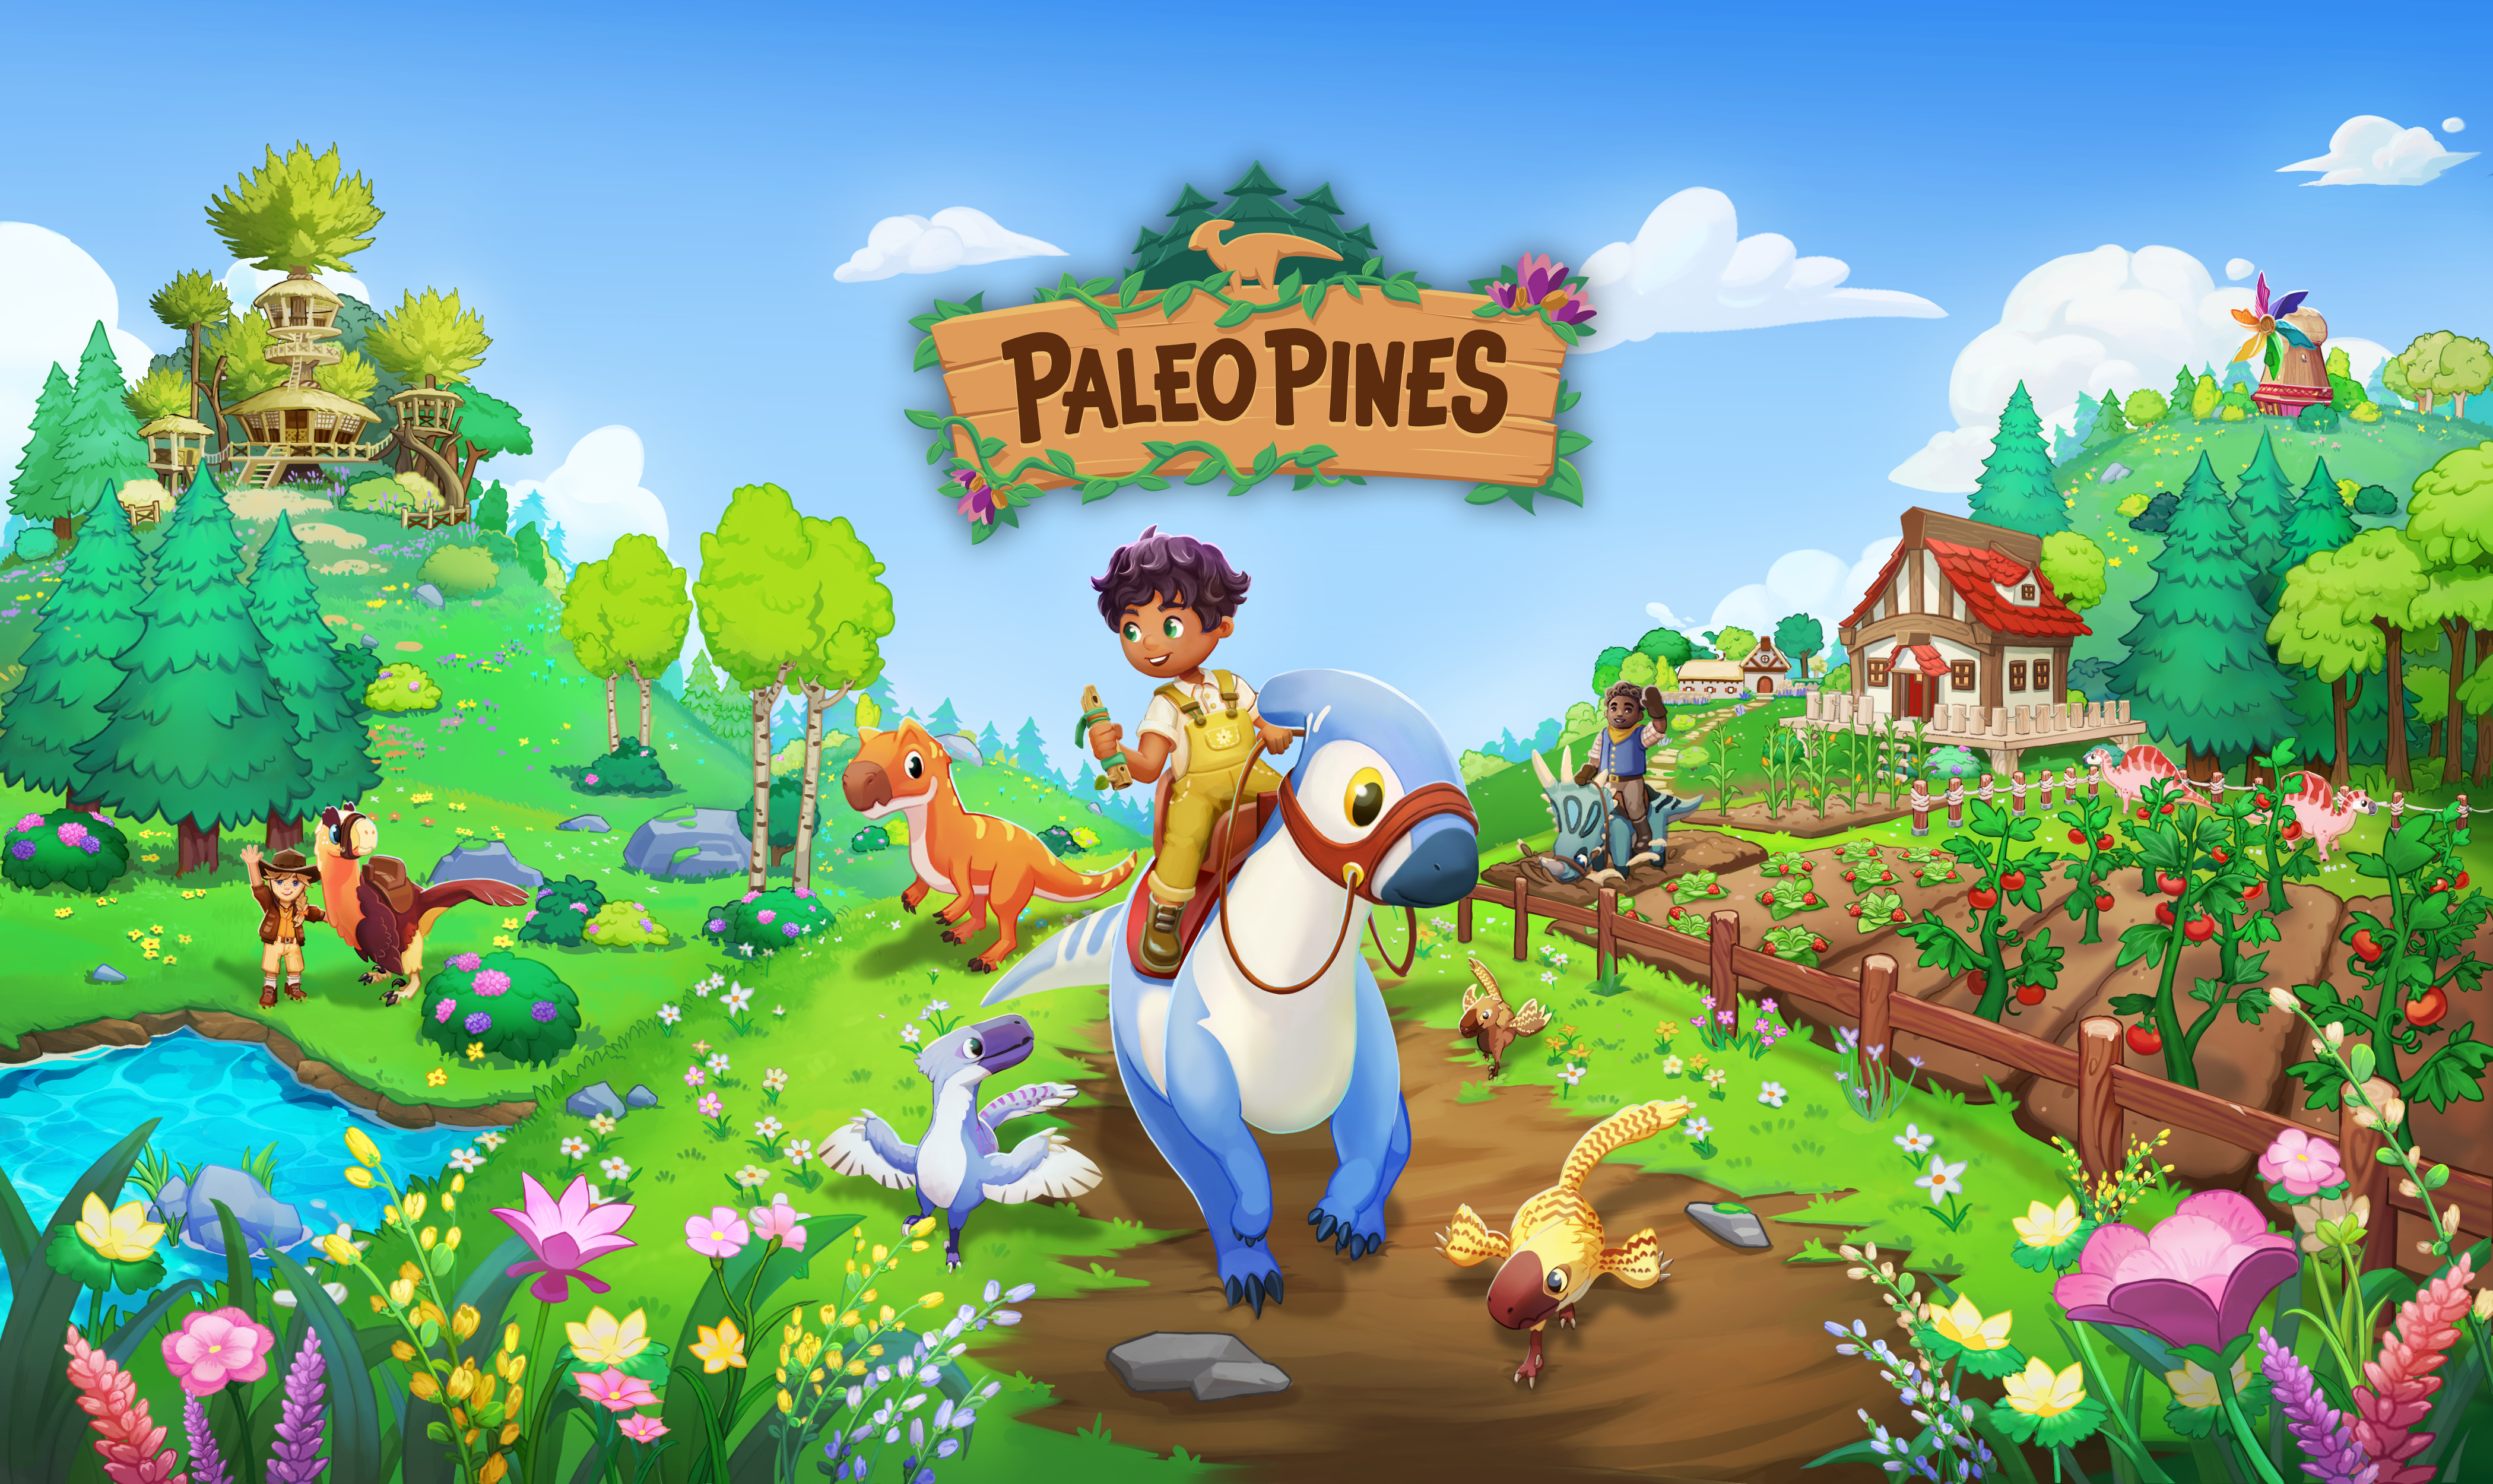 Dino Rancher Paleo Pines arriving this fall